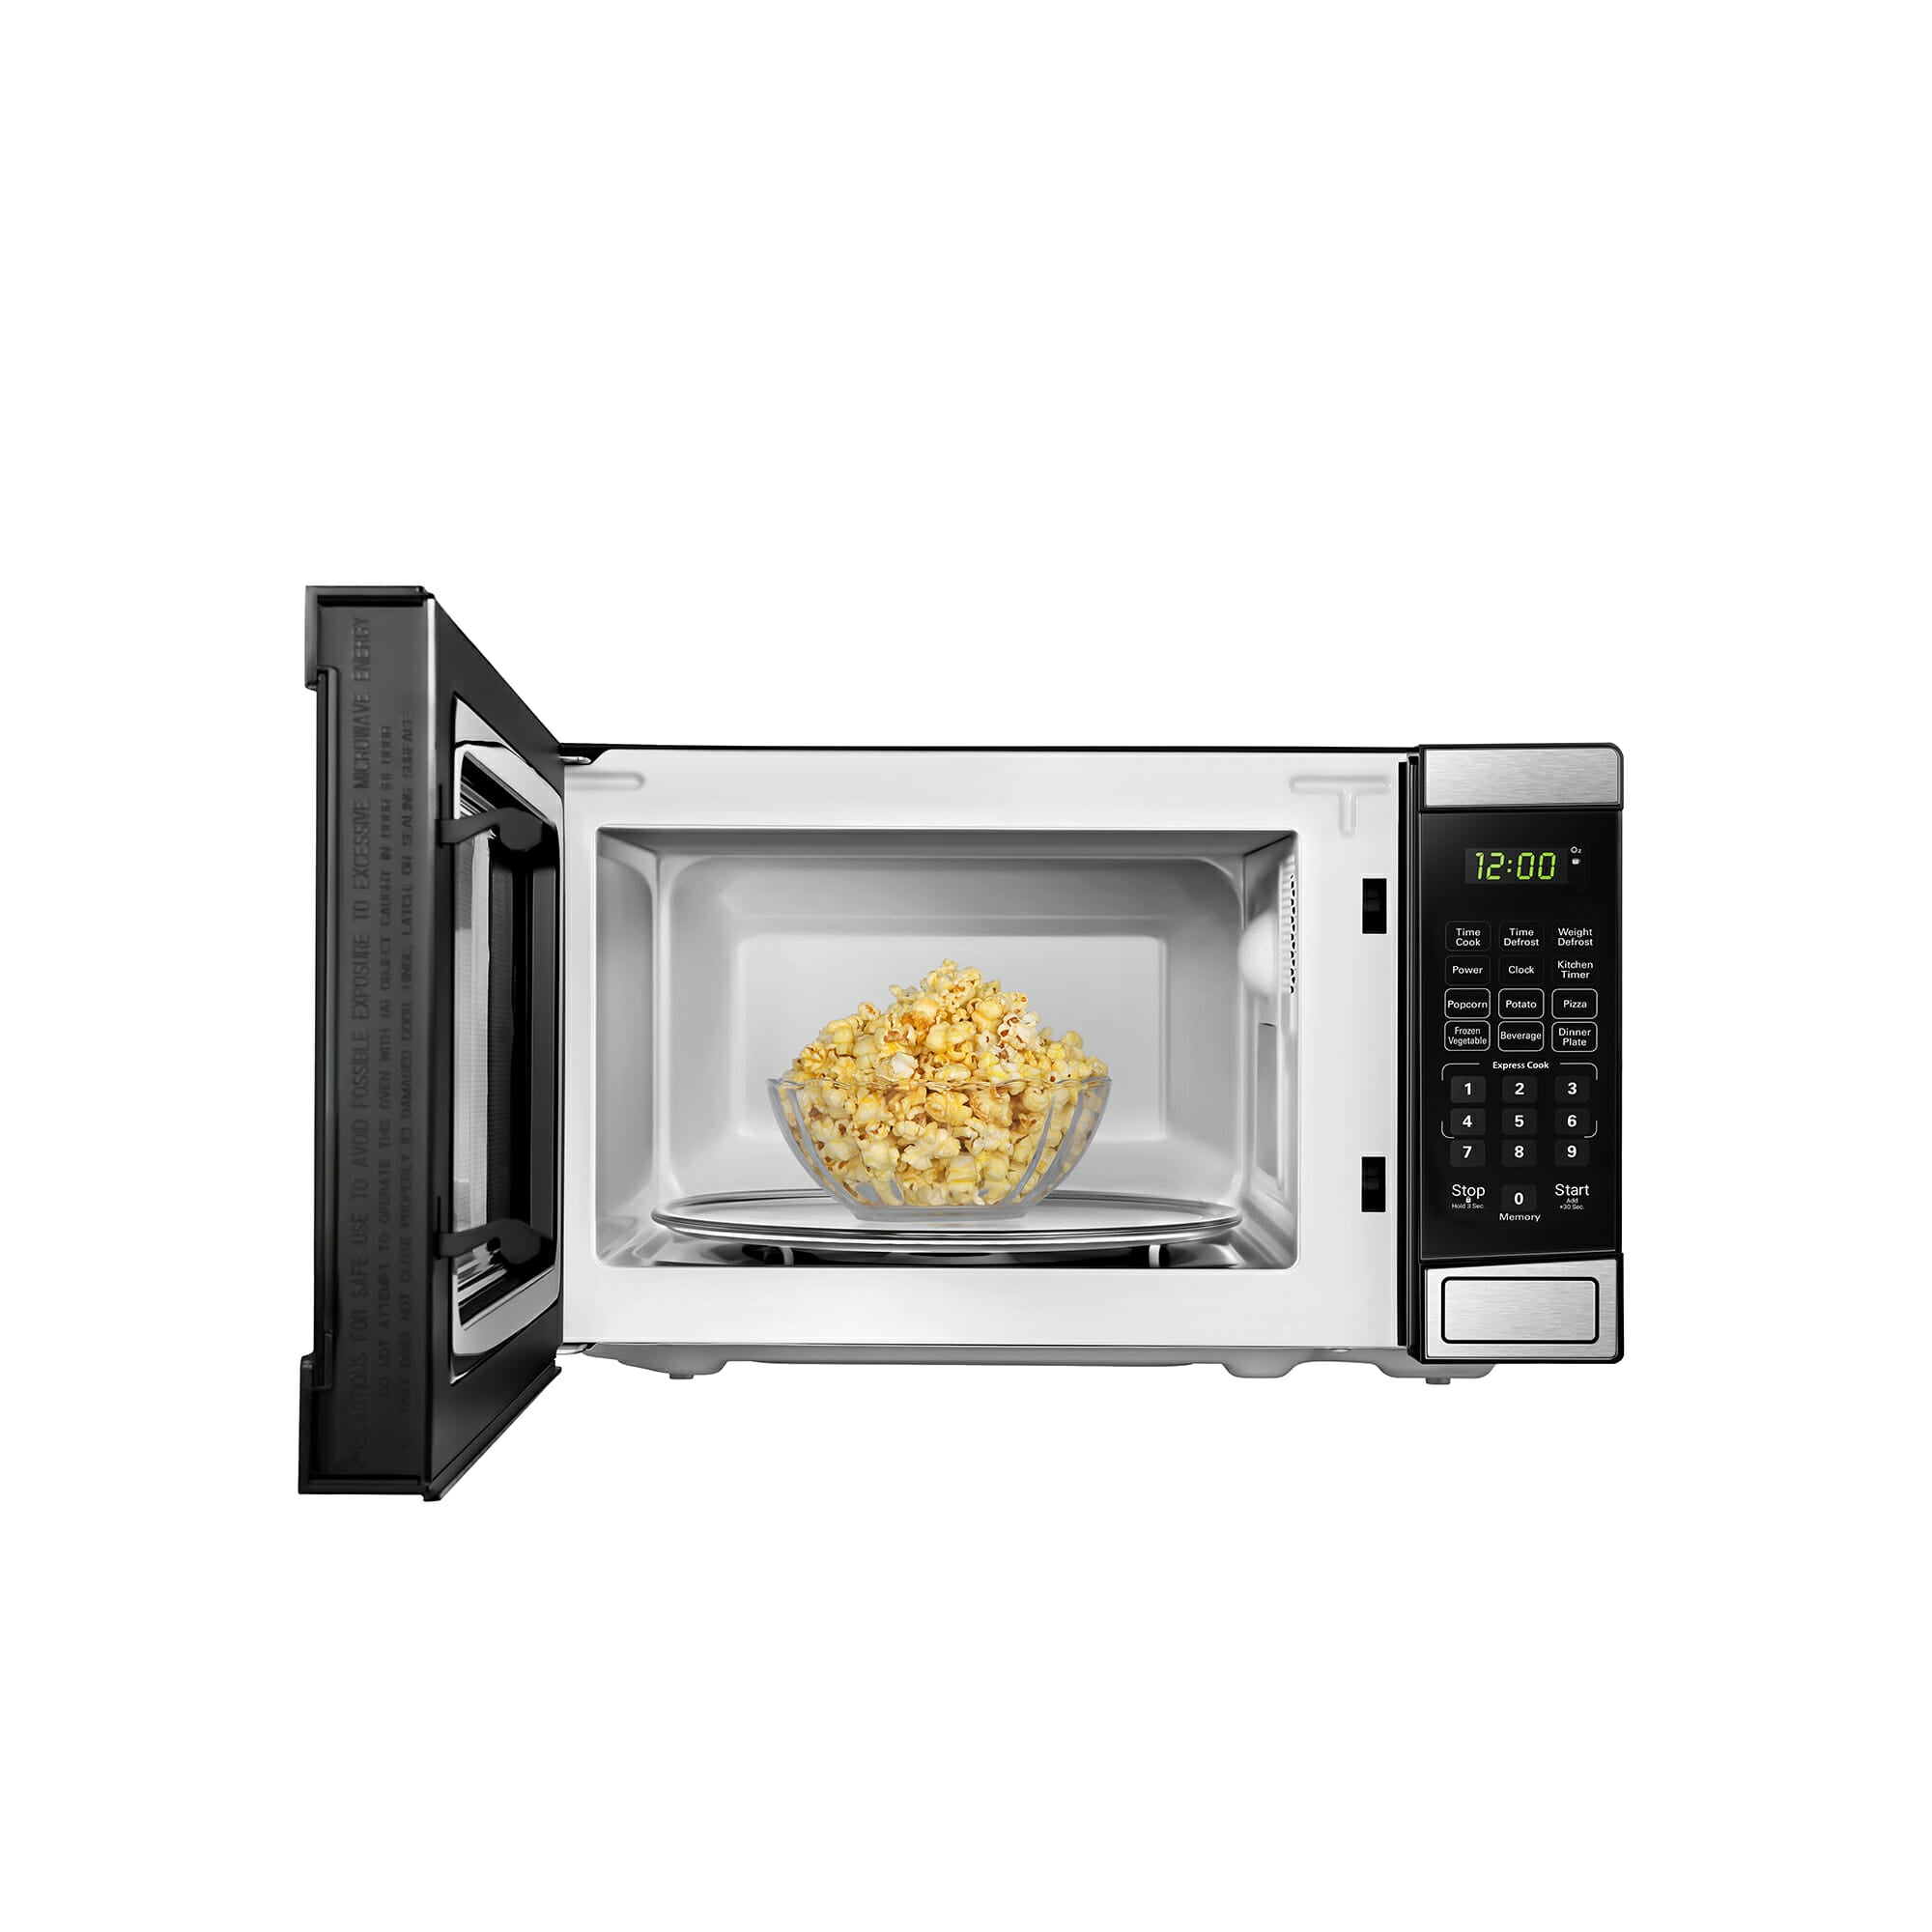 Danby - 0.7 cu. Ft  Counter top Microwave in Stainless - DBMW0721BBS